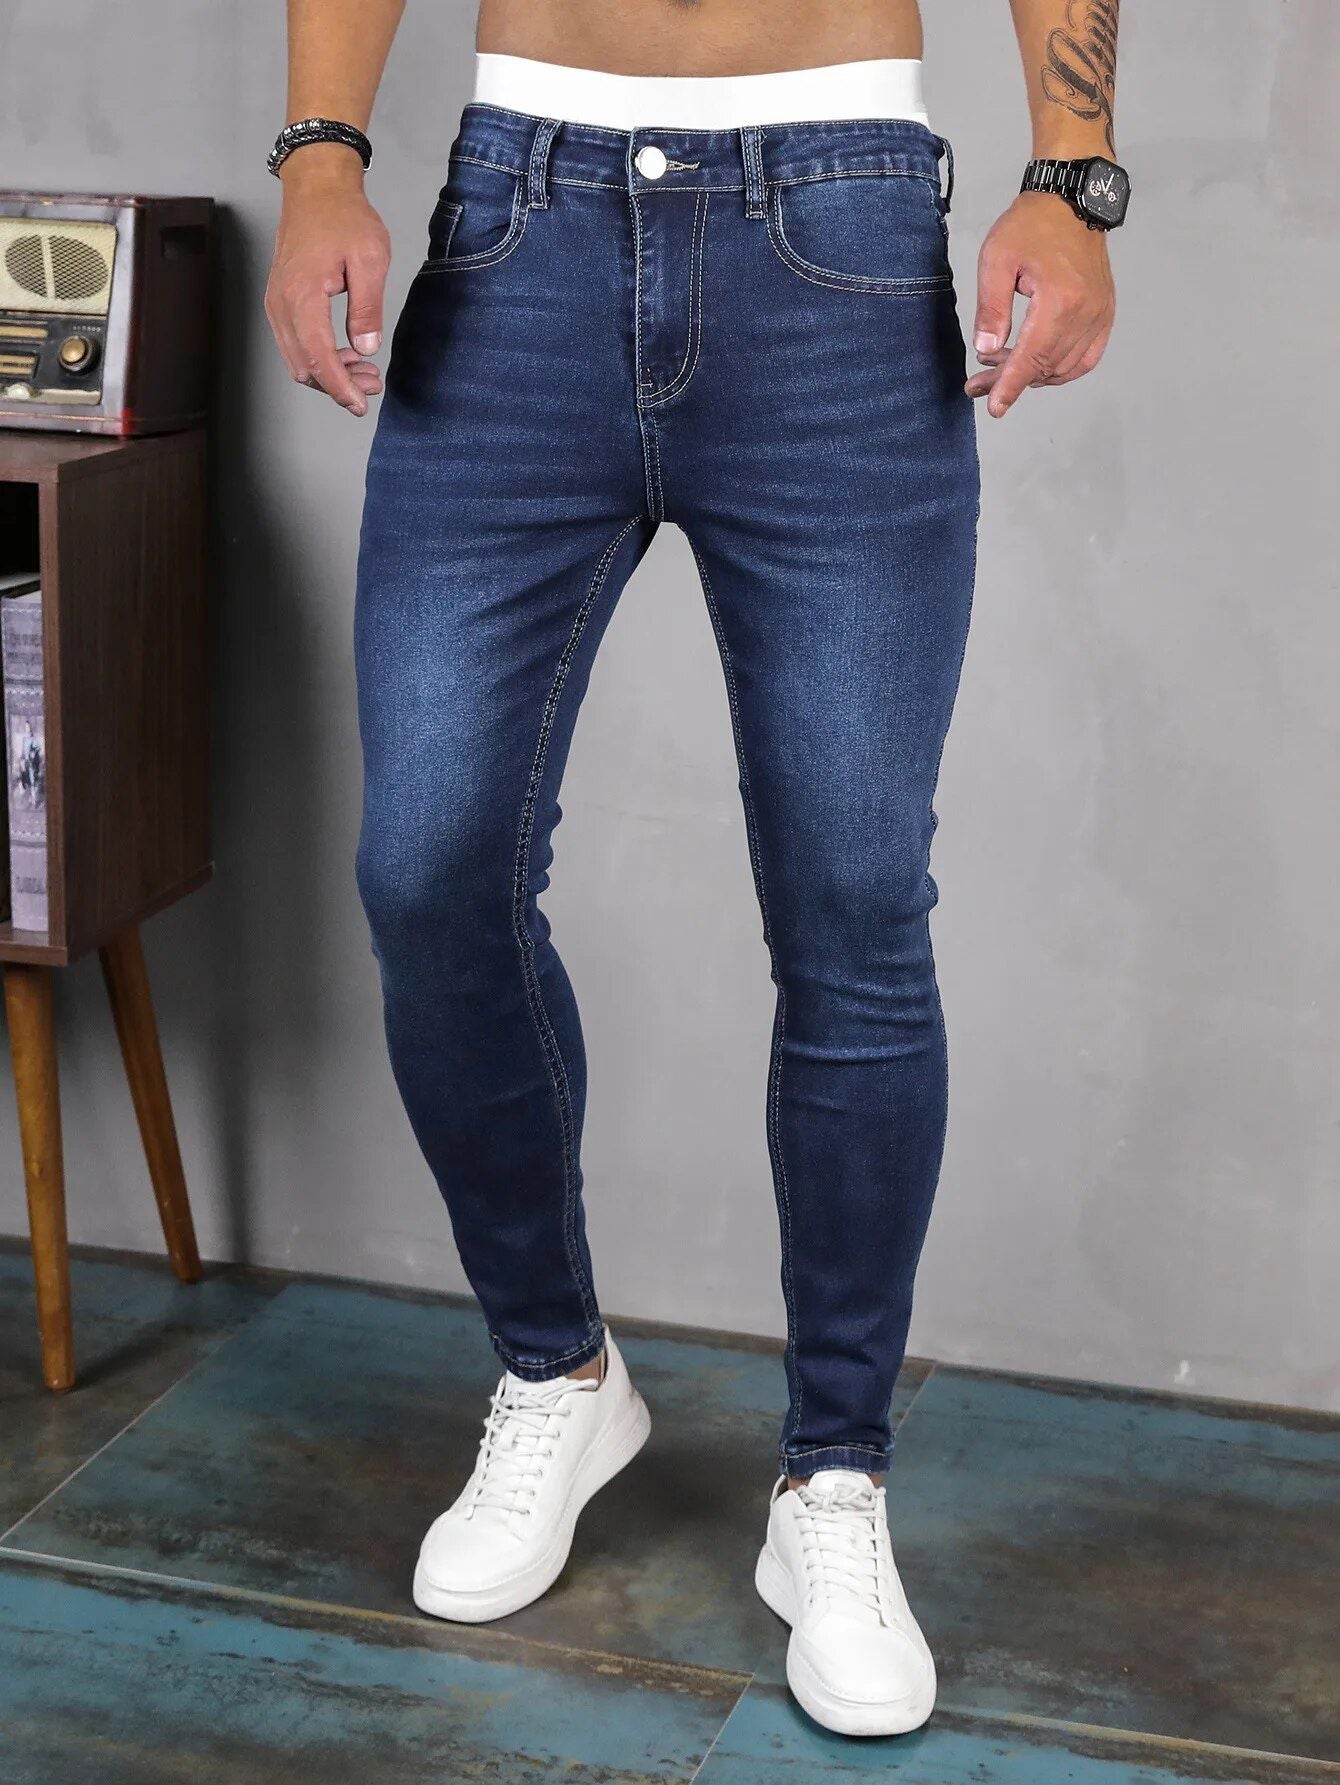 Blue color men's jeans, styled casually with a slim fit and pockets